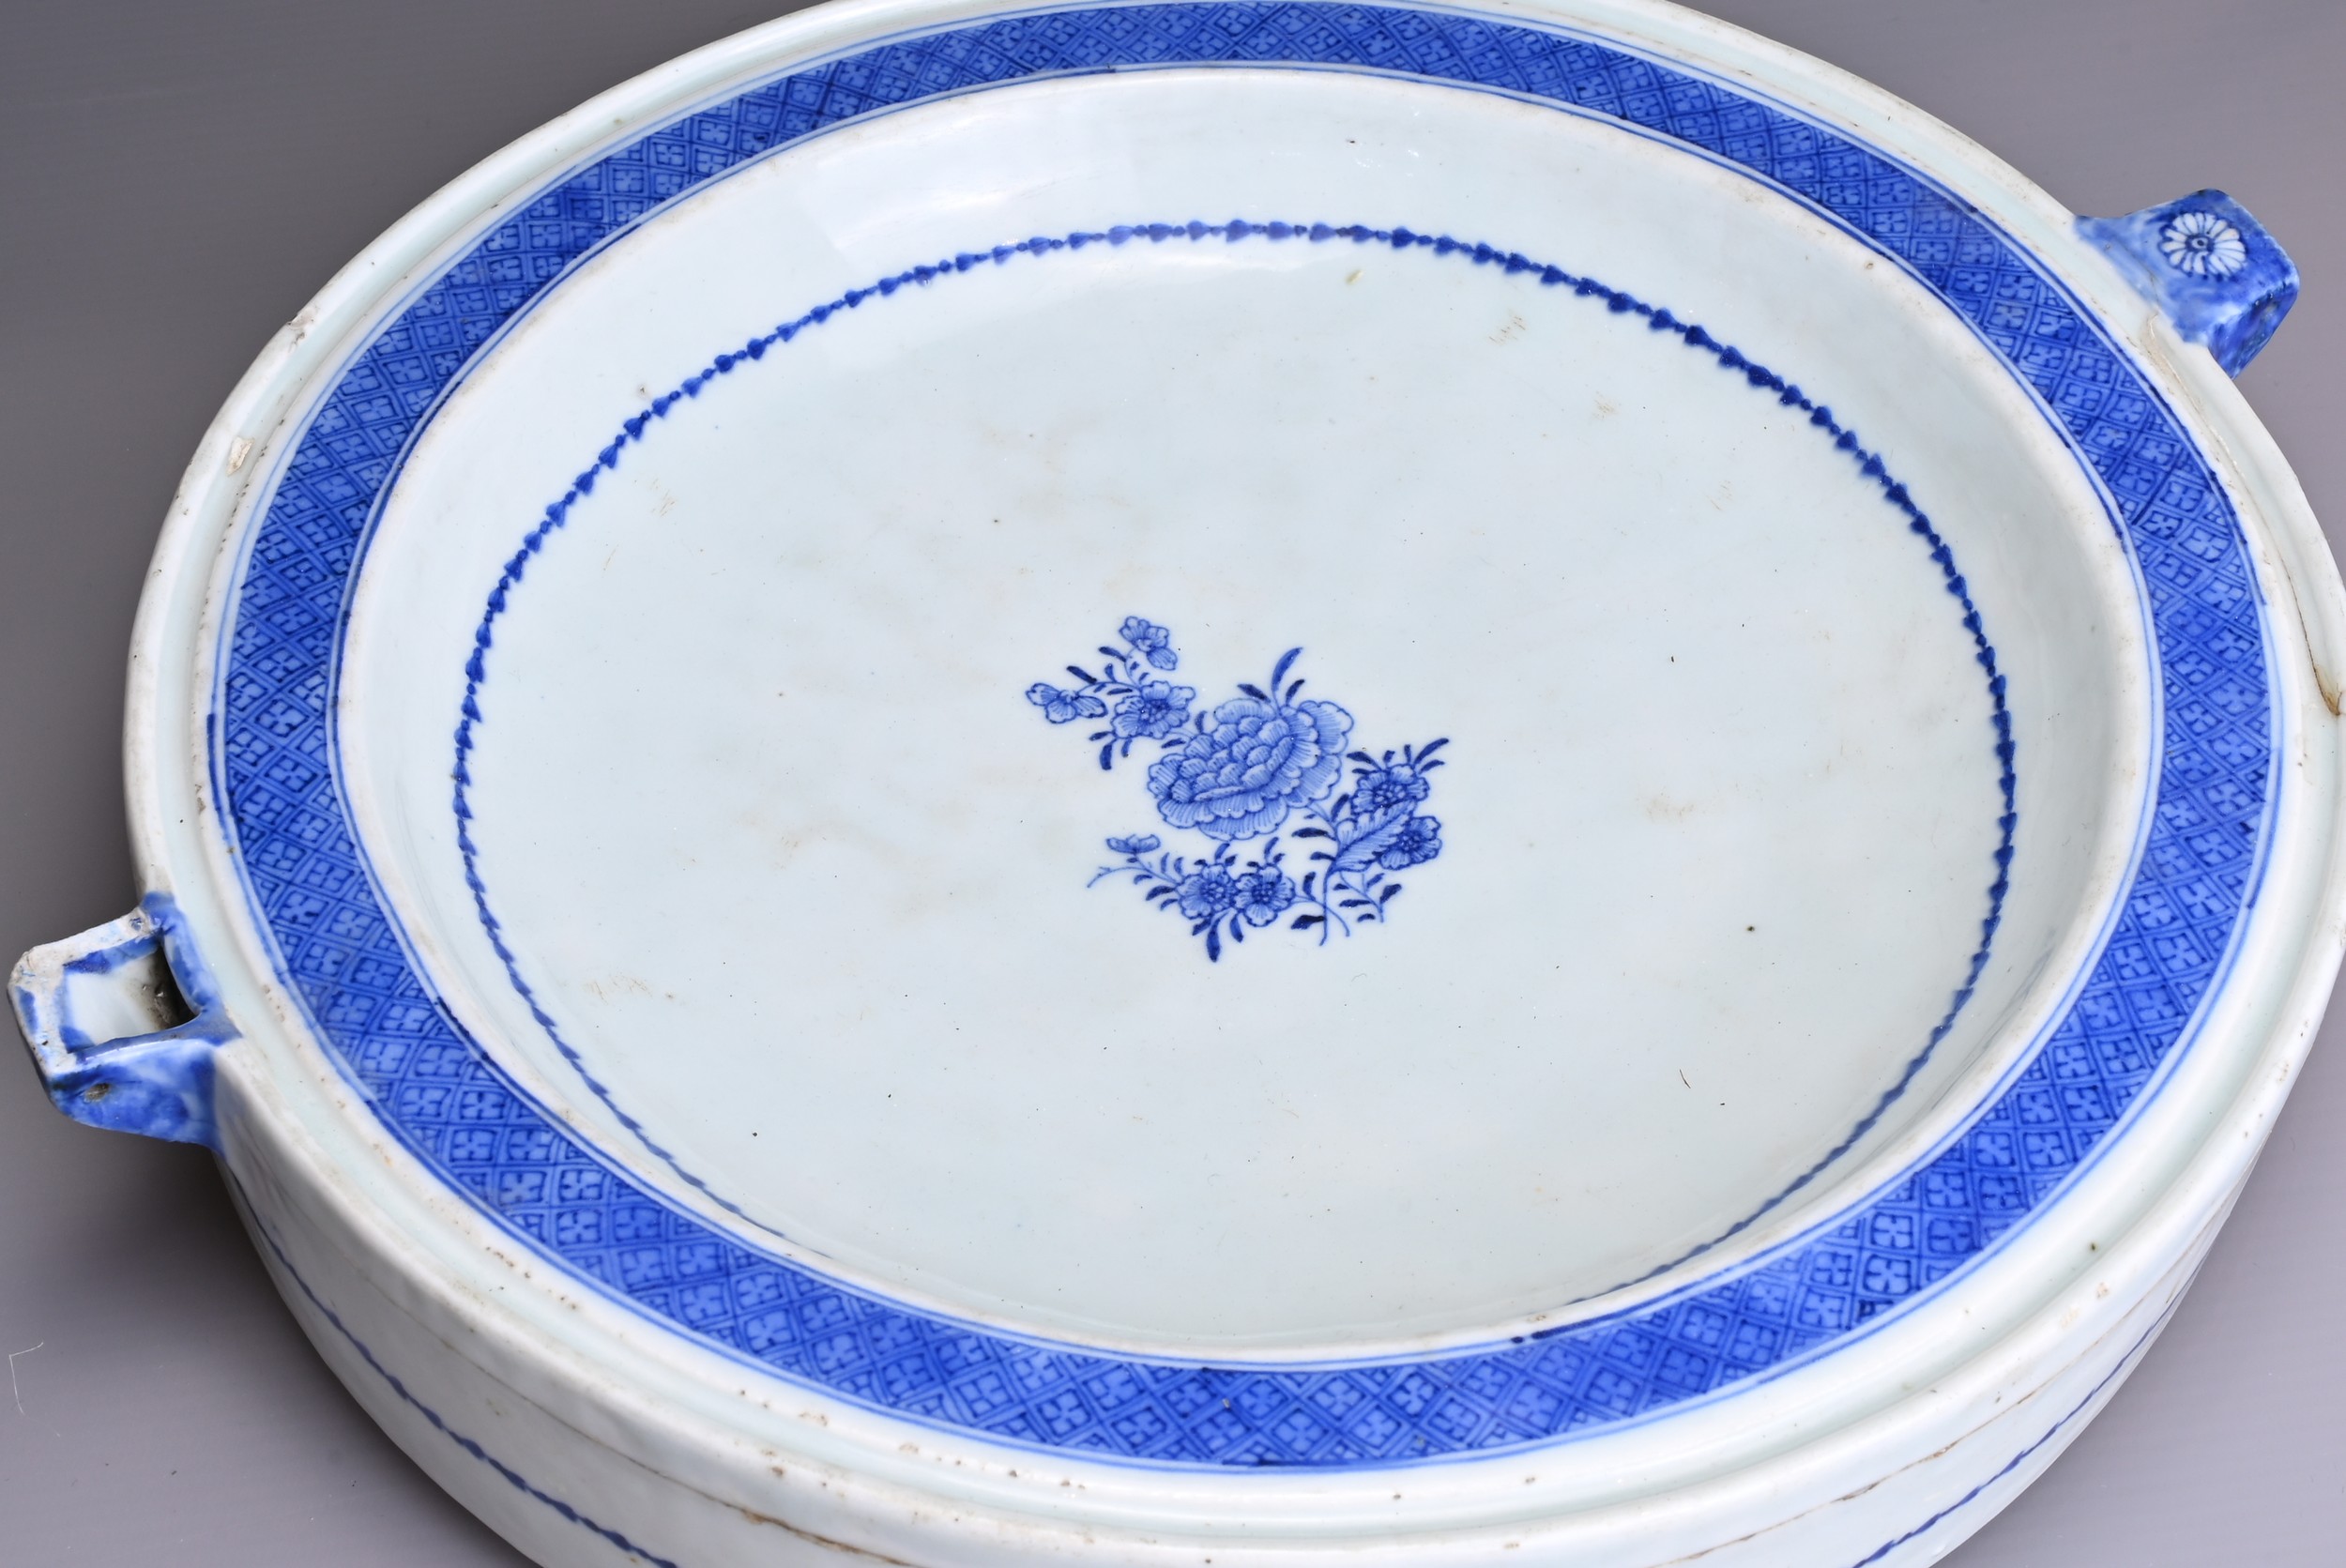 A LARGE CHINESE BLUE AND WHITE PORCELAIN WARMING DISH, 18TH CENTURY. Minimally decorated with - Image 2 of 6